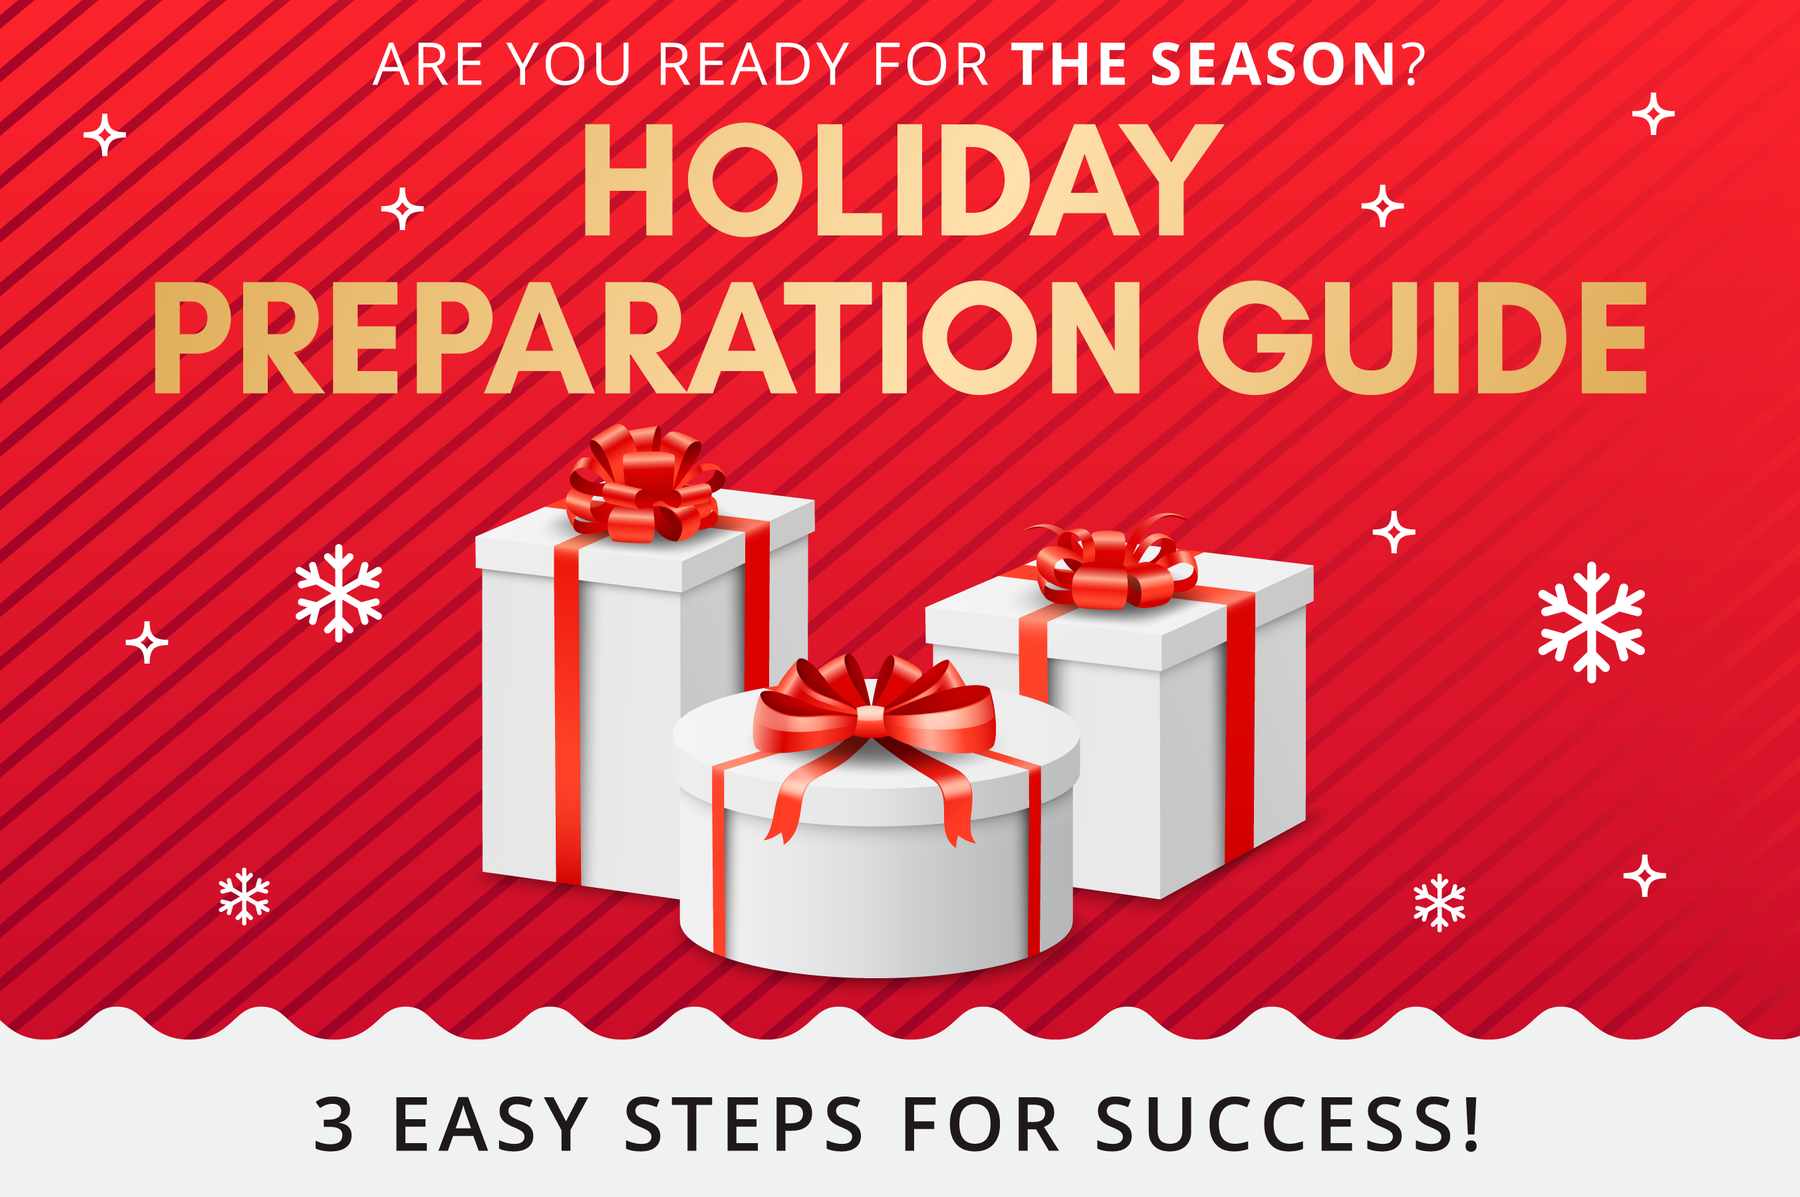 Holiday preparation guide!